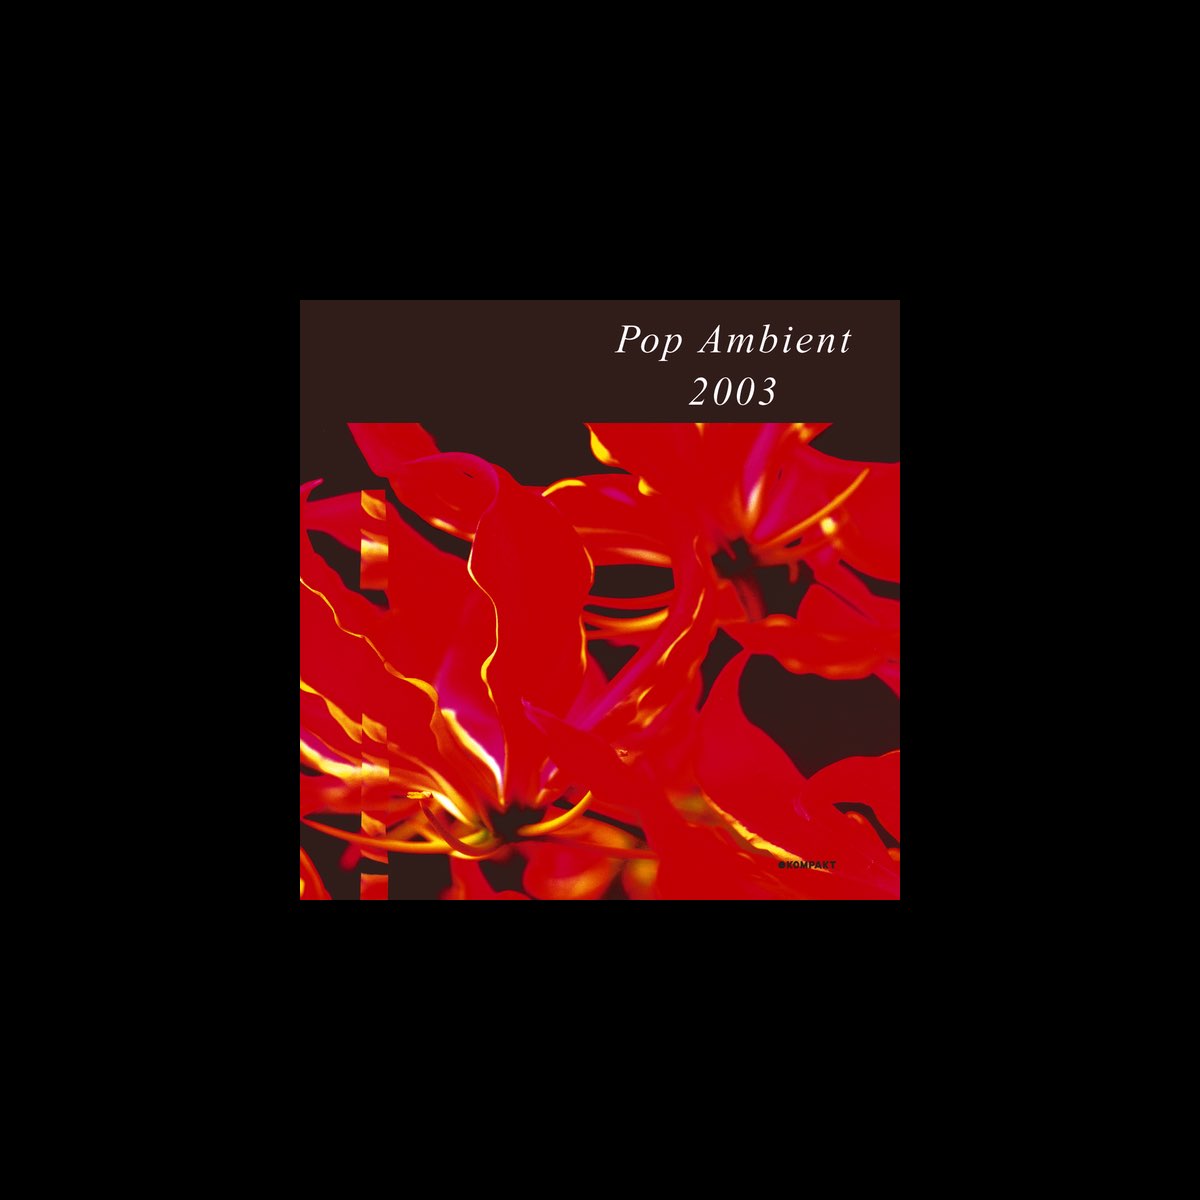 Pop Ambient 2003 by Various Artists on Apple Music